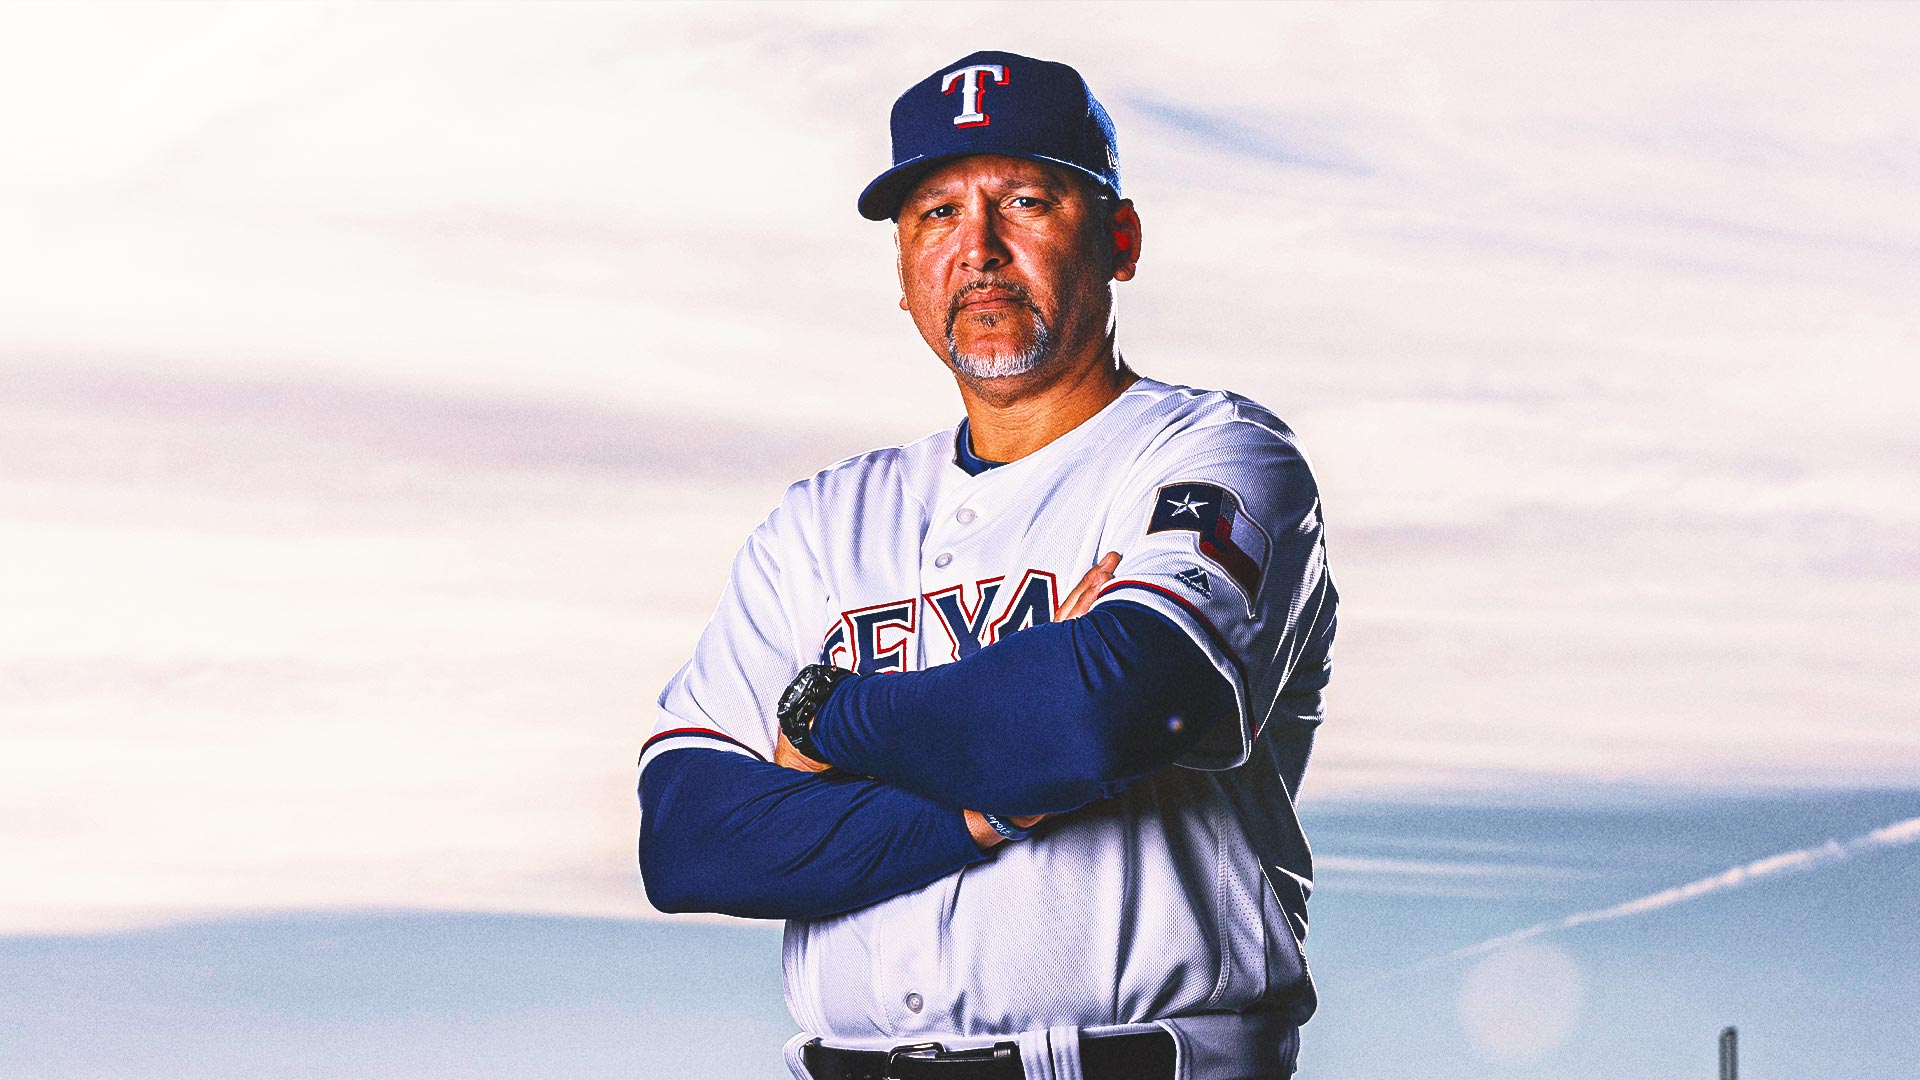 Texas Rangers coach Hector Ortiz dies at 54 after long battle with cancer